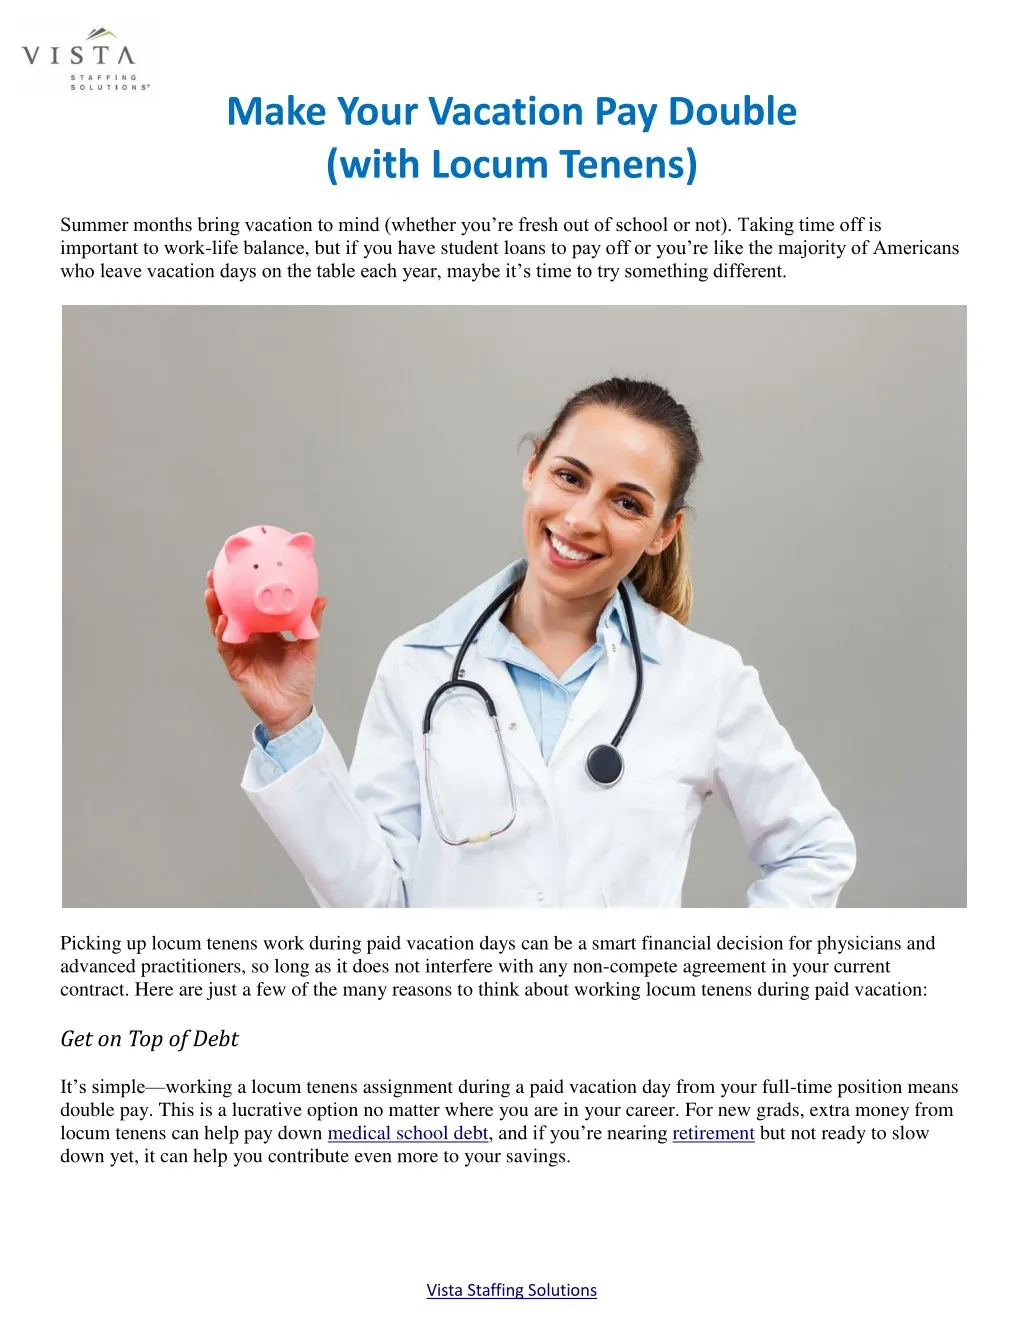 make your vacation pay double with locum tenens